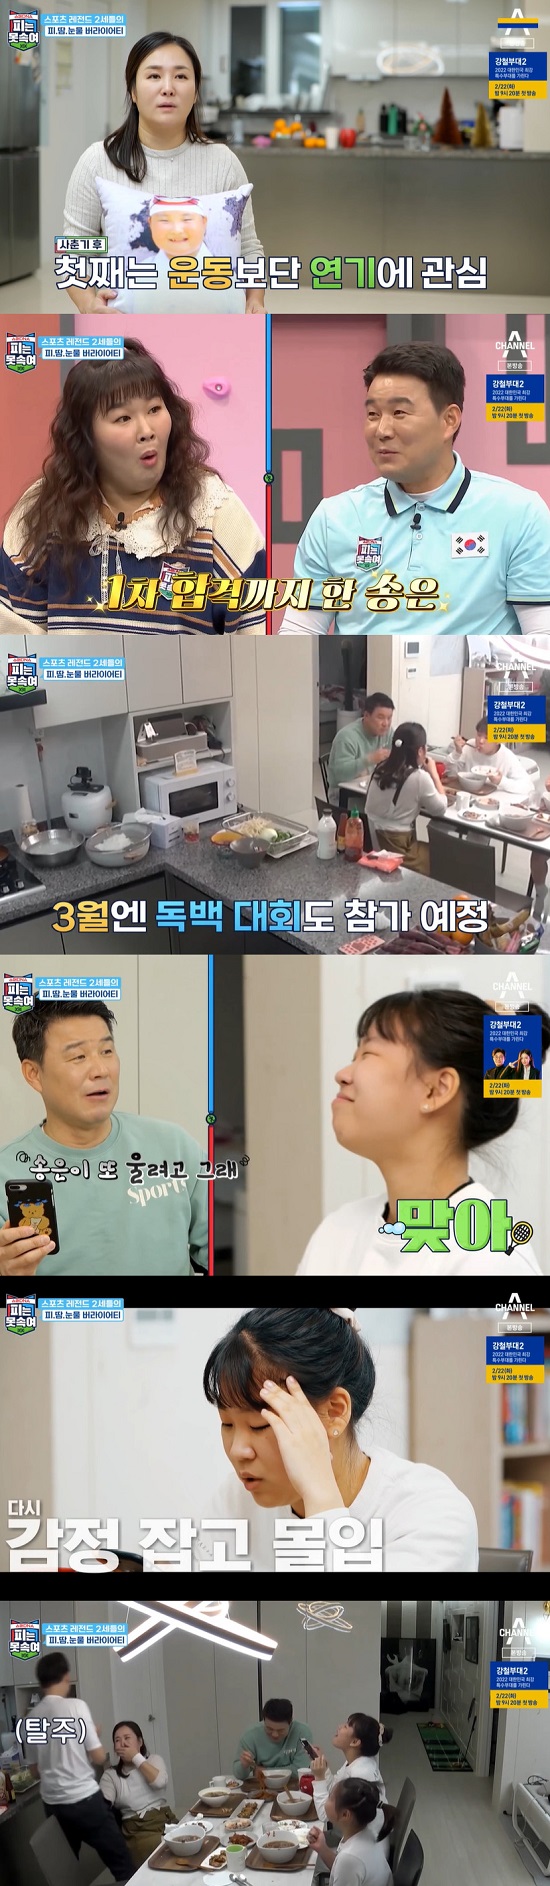 In the 7th episode of Channel A Super DNA Blood is Not Cheating (hereinafter Cant Flee) broadcast on the 21st, the story of Lee Hyung-taek and his 17-year-old daughter Song Eun-yi, who came to the tennis practice area where his youngest daughter Mina is training, and the story of Lee Hyung-taek Family, the tennis ability of 16-year-old son Chang-hyun, were revealed.On this day, Lee Hyung Taeks first daughter, Song Eun-yi, revealed why she quit tennis and made Lee Hyung Taek tearful.Song Eun-yi said in an interview: There were many decisive reasons: Father was a tennis player, and he was a coach.Since she was a child, Mina has grown up hearing that she has a motor nerve, and she thinks exercise is Minas.I would not have quit Tennis if I heard that. Since then, Lee Hyung Taek has expressed his sorry heart in the past, which he treated strongly to his daughter.Lee Hyung-taeks wife asked, Did you feel any pain when you came to audition in Korea at United States of America? So Song Eun-yi said, Its a thrill then.But Tennis is a horror, he replied.At the studio, Lee Hyung-taek said, The excitement and fear were definitely different.Lee Hyung-taeks wife said,  (Song Eun-yi) has a lot of interest in acting rather than exercising. He said, I supported the web drama and passed the first time.In addition, Lee Hyung-taek said, I went to see the web drama audition alone at United States of America.Lee Hyung-taeks wife asked Song Eun-yi, Is not the monologue contest scheduled to take place in March? Song Eun-yi continued to explain the contents of the monologue contest.Song Eun-yi said, Father is the content of defending his child. When he almost tears, Lee Hyung-taek asked, I am going to cry again, did you think Father?Song Eun-yi showed a monologue performance, and Lee Hyung-taeks son Chang-hyun went into the room with a response I hate it.Mina later left, saying, Im sorry Im going to laugh.So Song Eun-yi burst into tears without showing the performance to the end.Photo: Channel A broadcast screen